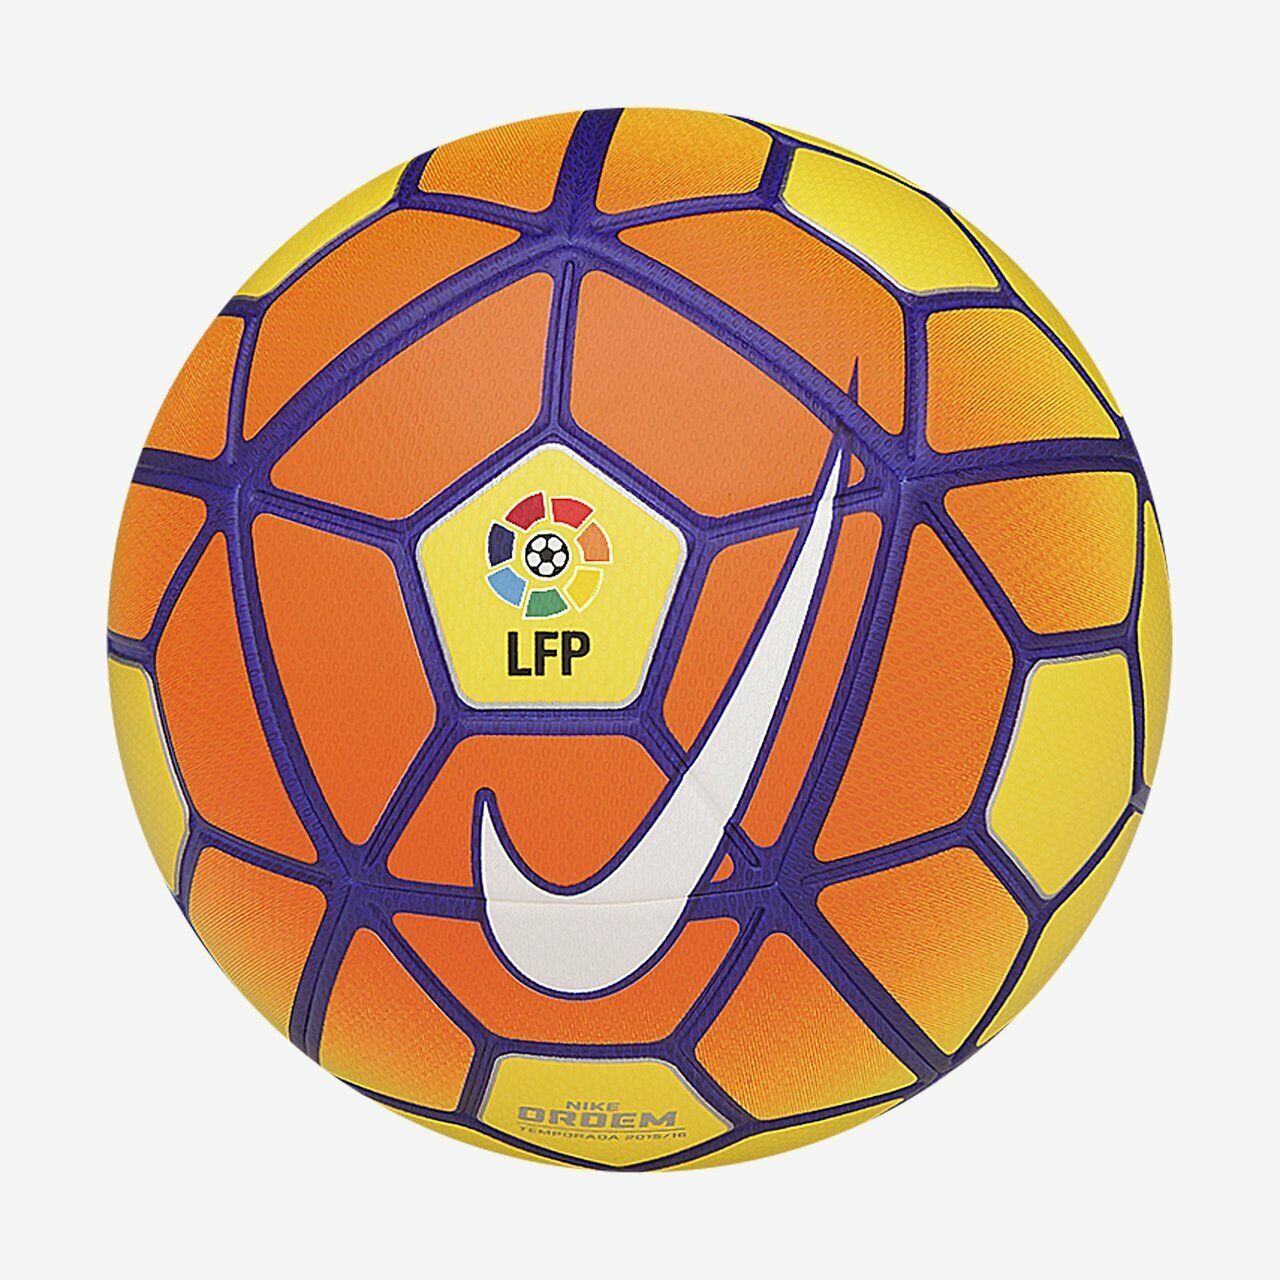 domestic exposure Independent Nike Ordem 3 LFP Official Match Soccer Ball 2015/2016 Size 5 - FIFA QUALITY  PRO | eBay